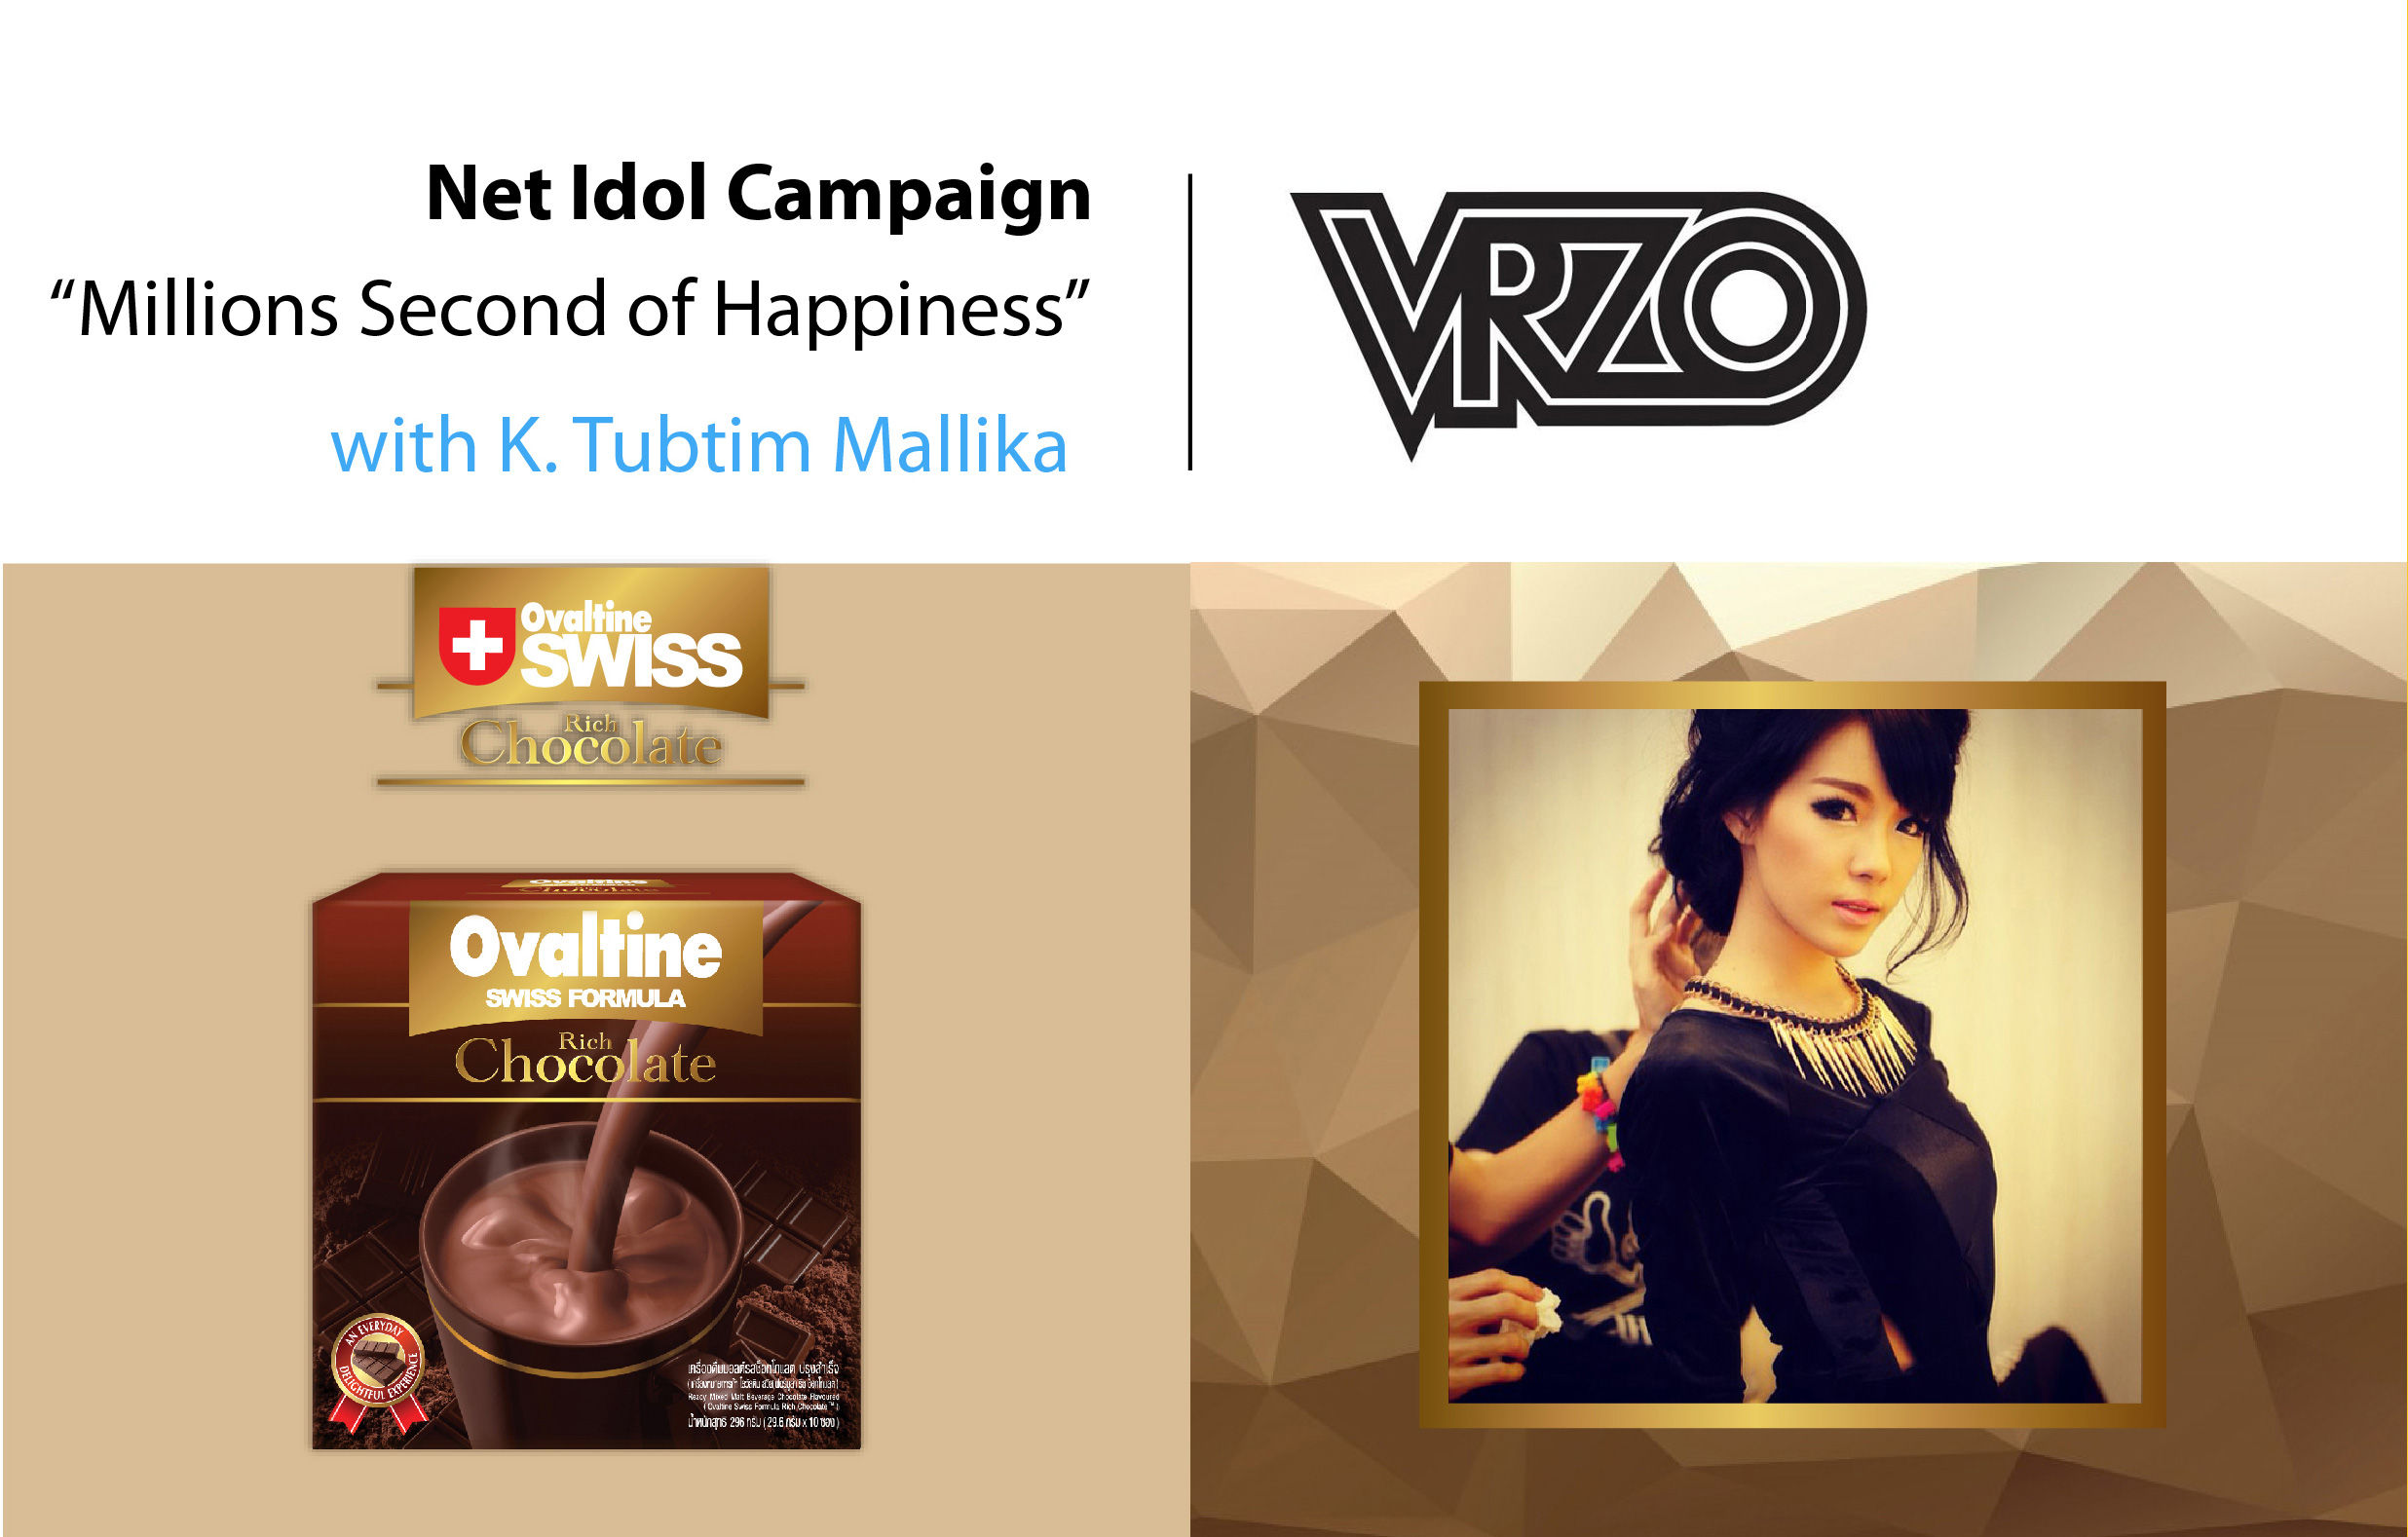 Net Idol Campaign Milions Second of happiness